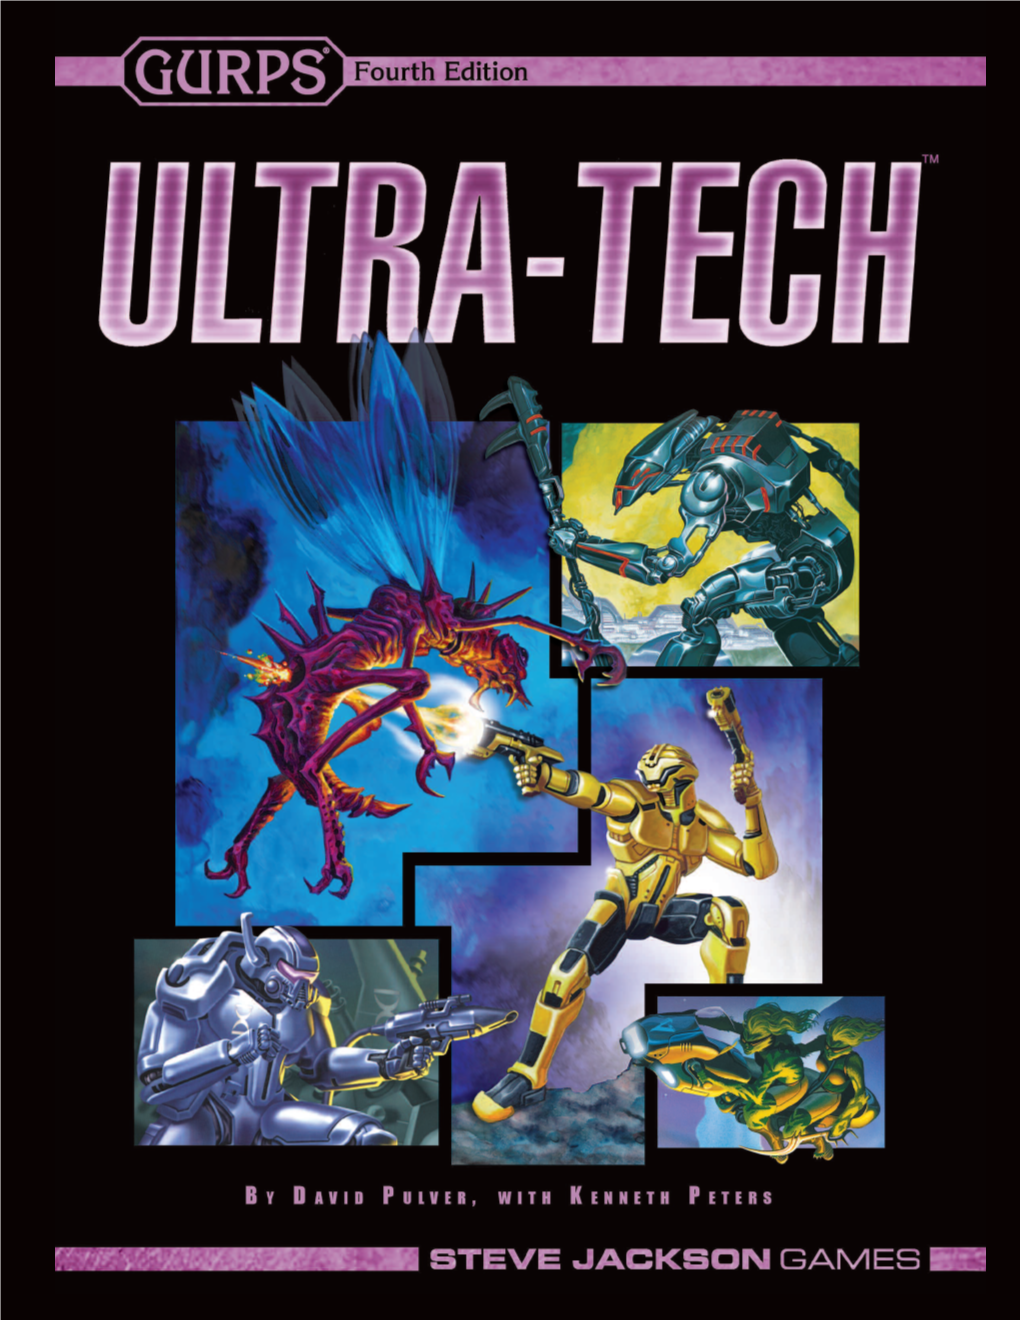 GURPS Ultra-Tech Is a Sourcebook for Science-Fiction Technology, from the Near Future to the Farthest Reaches of the Imagination